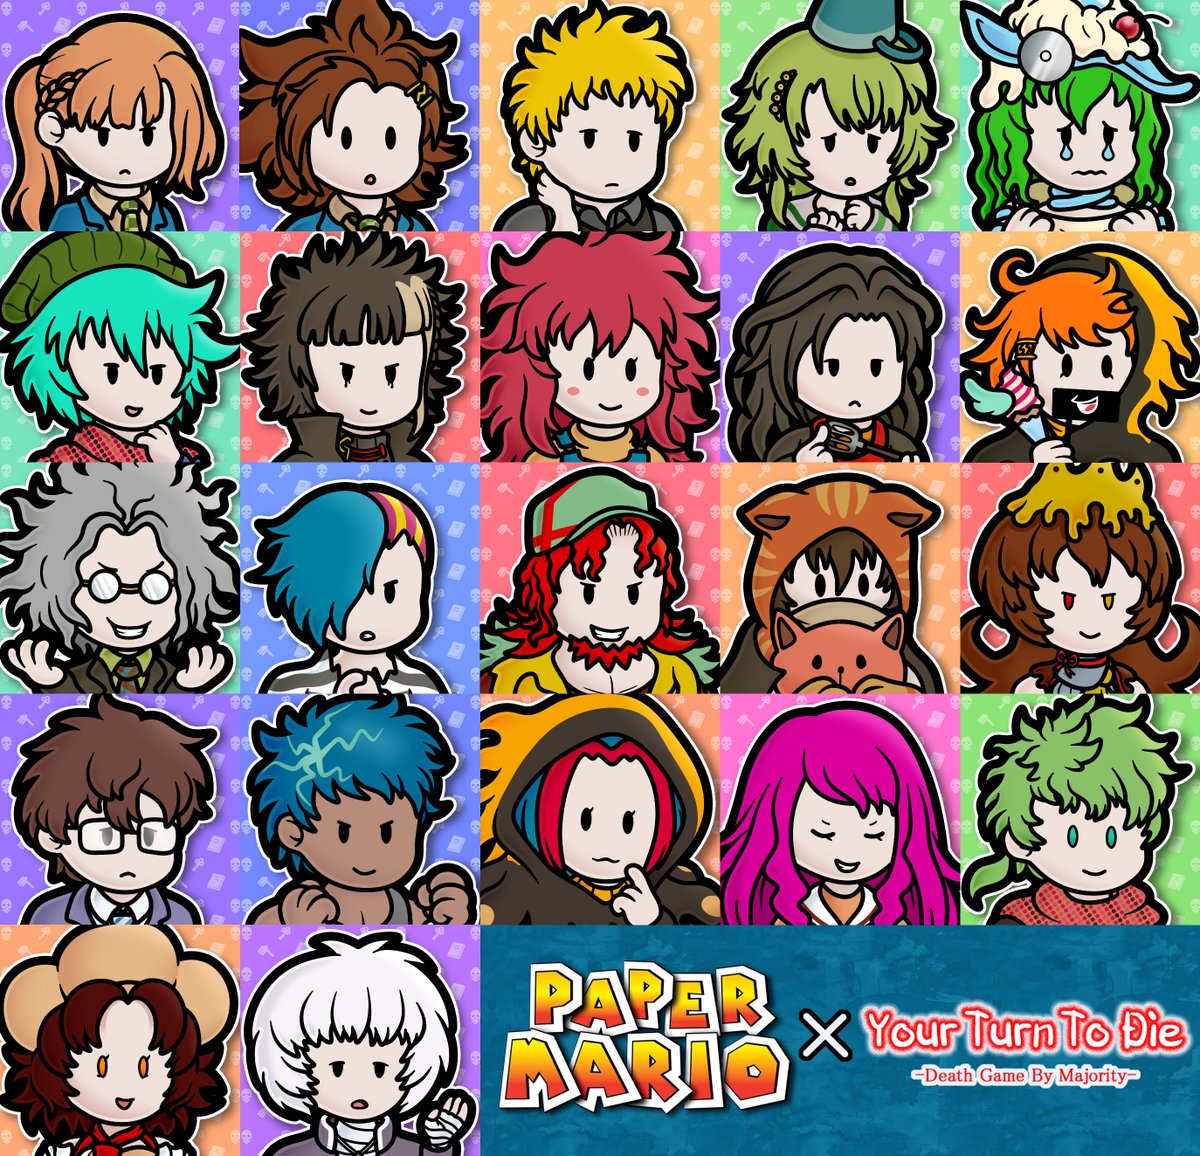 YTTD characters in the Paper Mario art style ! 